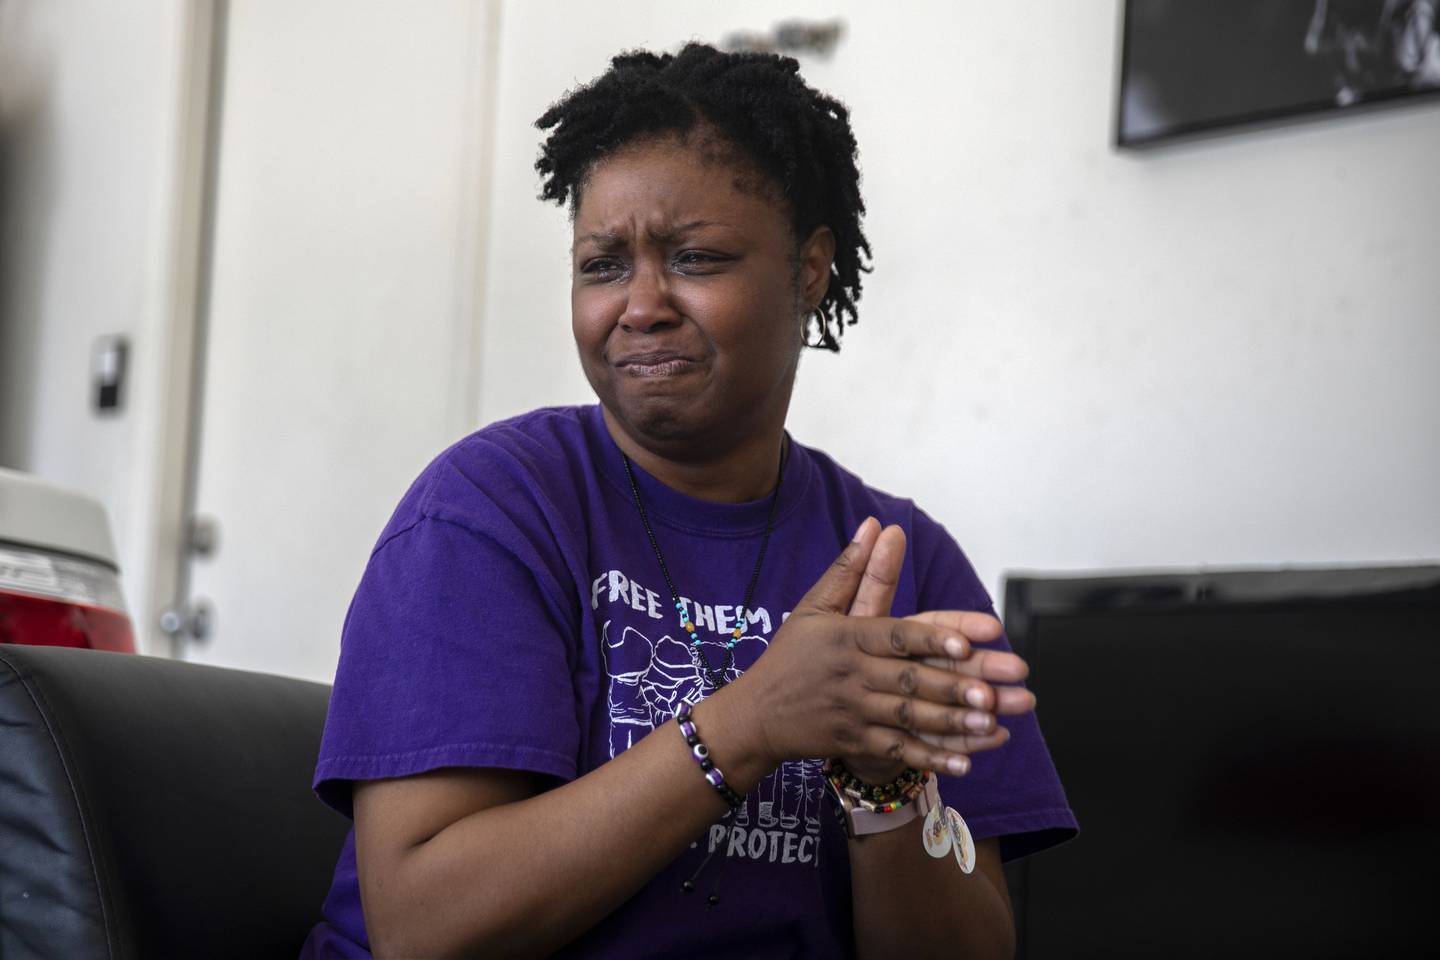 Sandra recounts the altercation that left her brother's girlfriend, Tiffany Washington, dead of a gunshot wound and Brown in the Illinois prison system for 22 years on April 27, 2022.